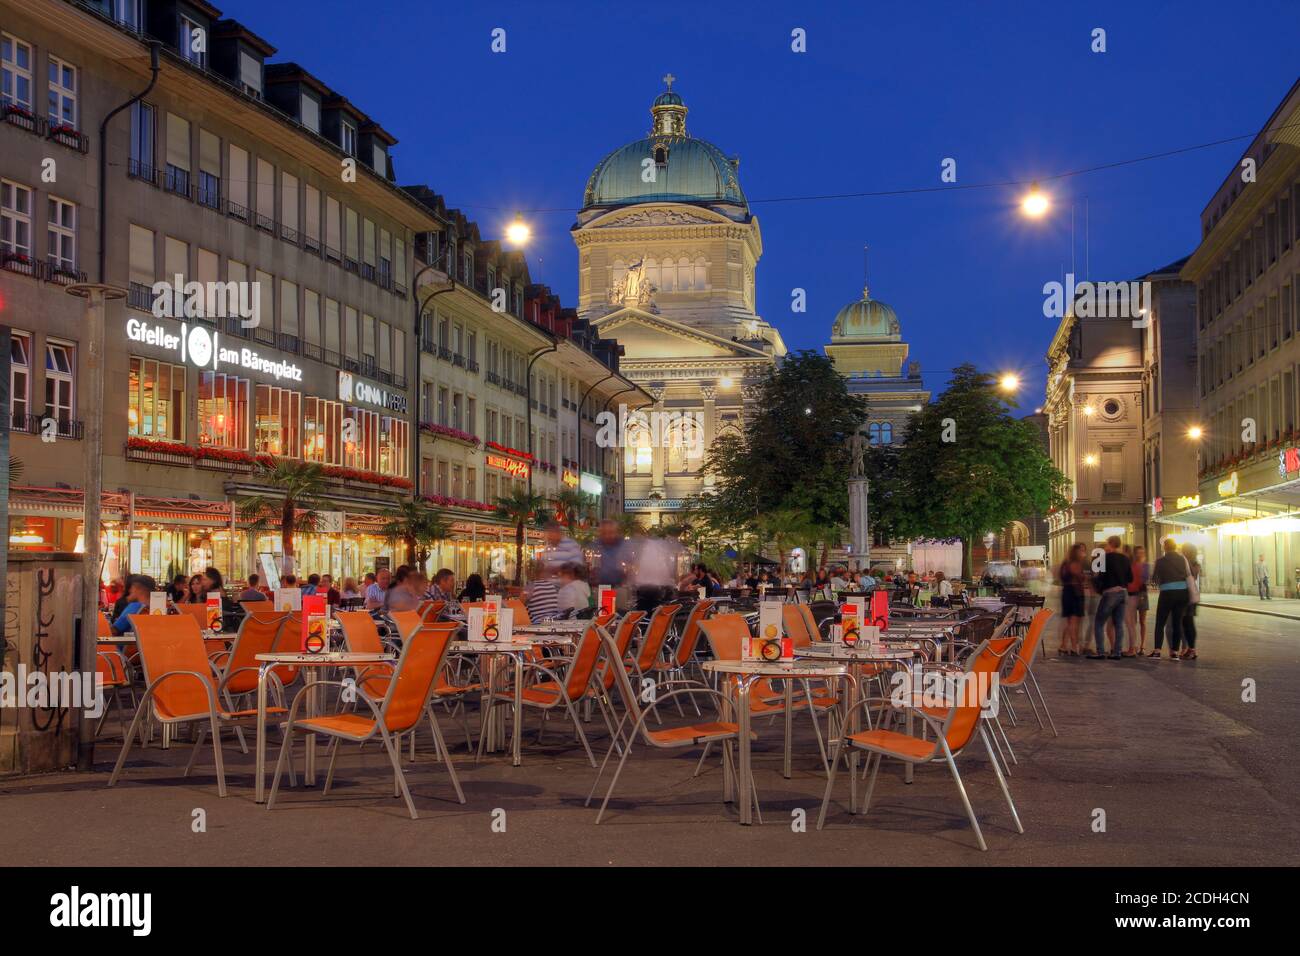 BERN, SWITZERLAND - JUNE 23: Barenplatz, with the Swiss Parliament Building looming over the square in Bern, Switzerland on June 23, 2012. Barenplatz Stock Photo